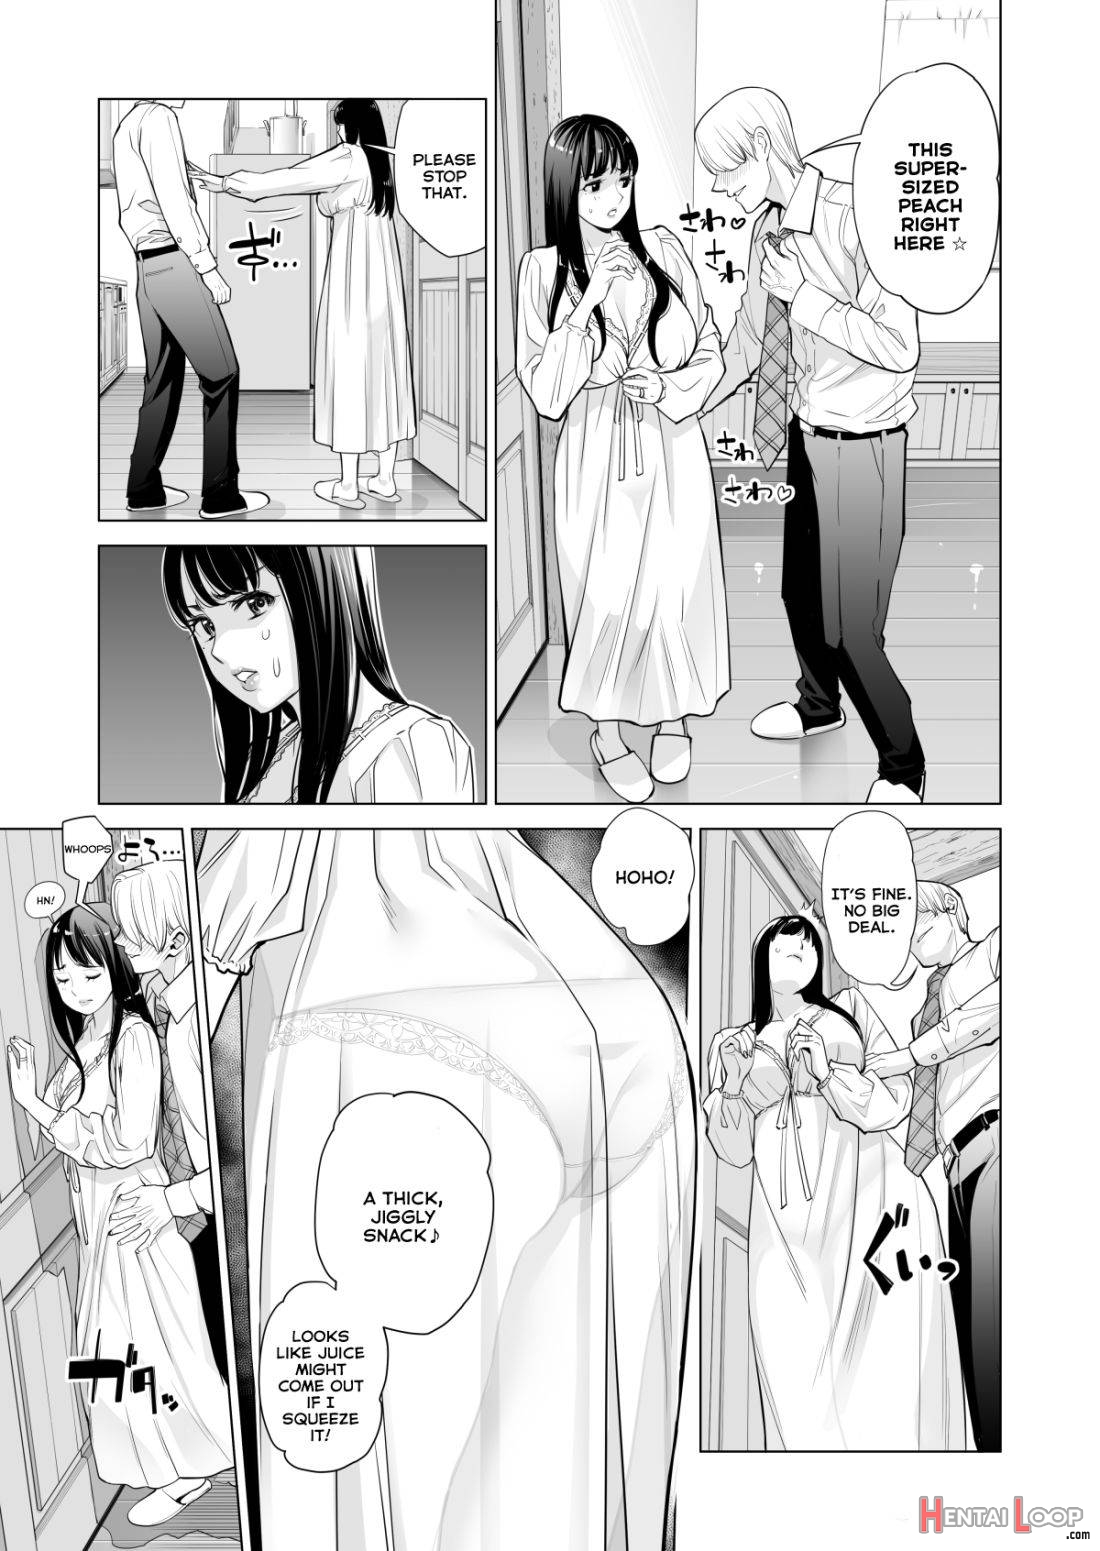 Tsukiyo no Midare Zake (Zenpen) Moonlit Intoxication ~ A Housewife Stolen by a Coworker Besides her Blackout Drunk Husband ~ Chapter 1 page 17